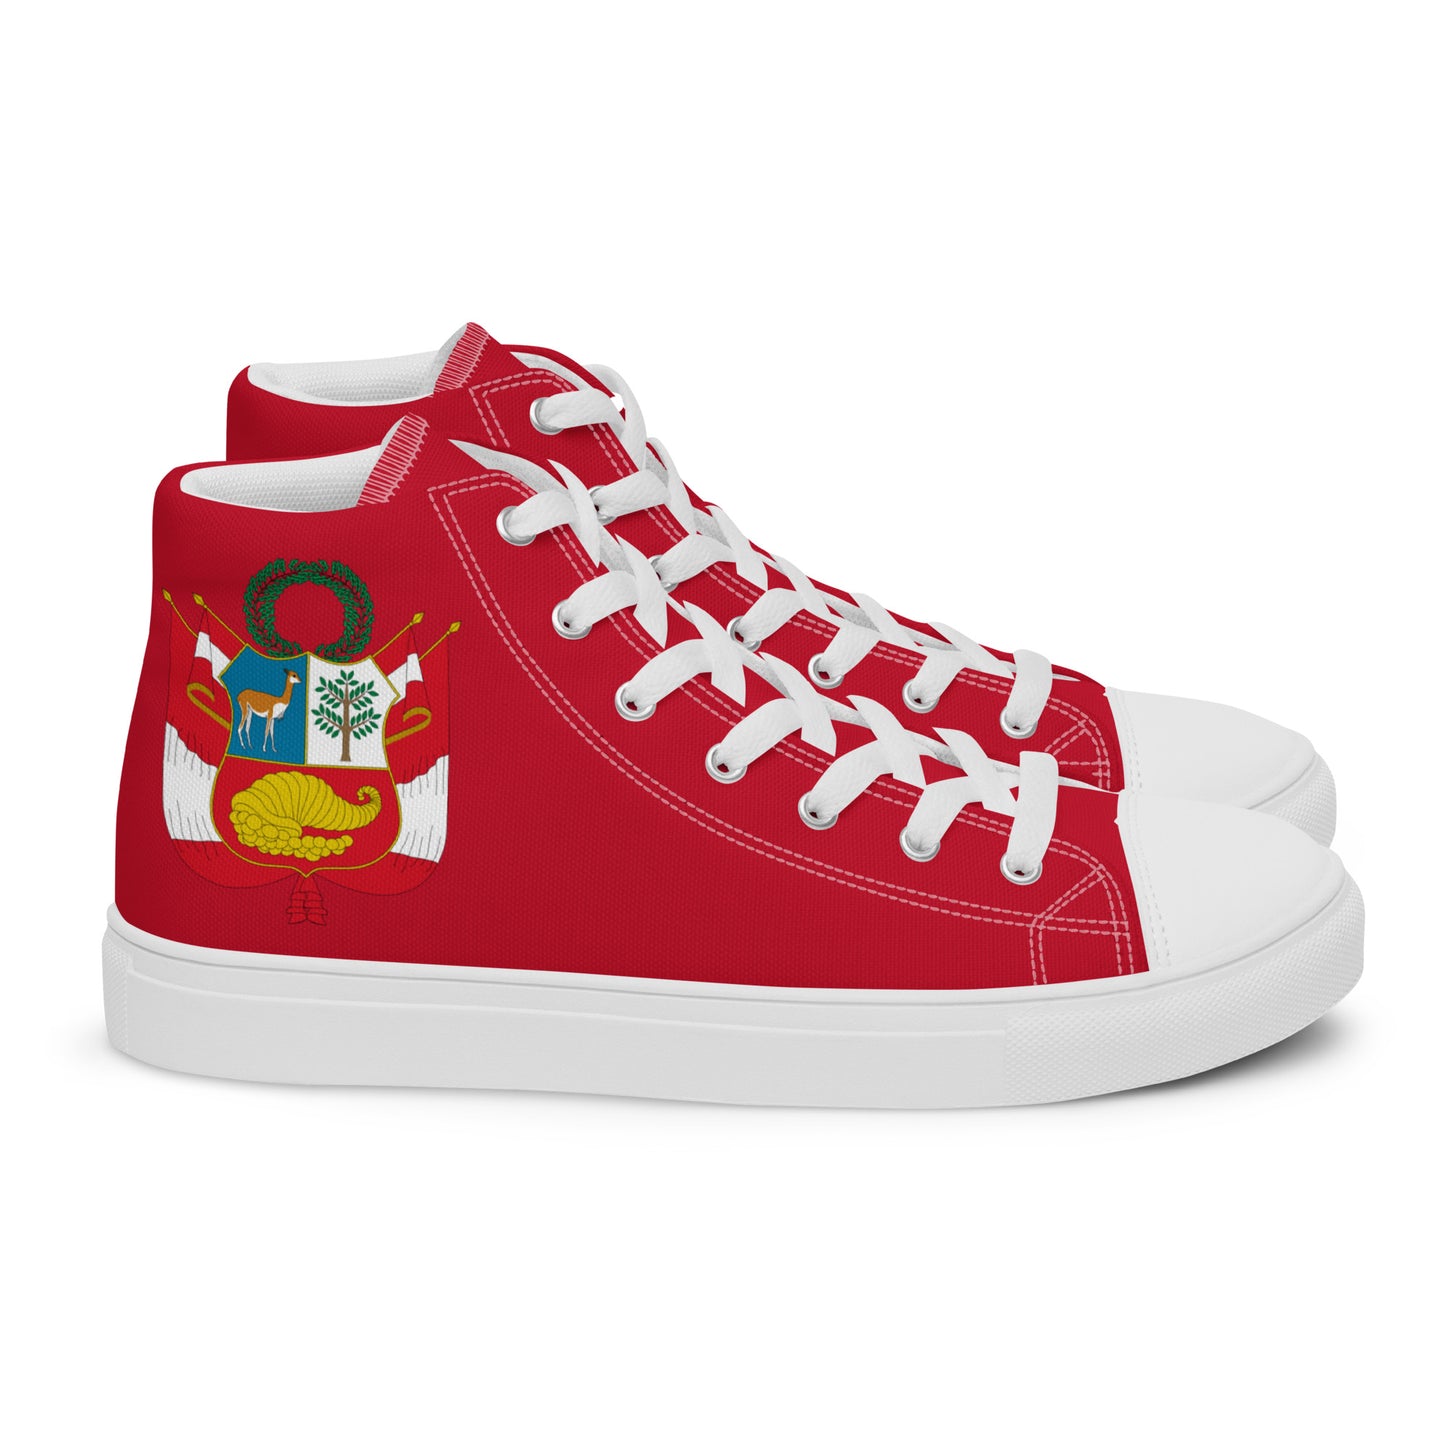 Perú - Women - Red - High top shoes